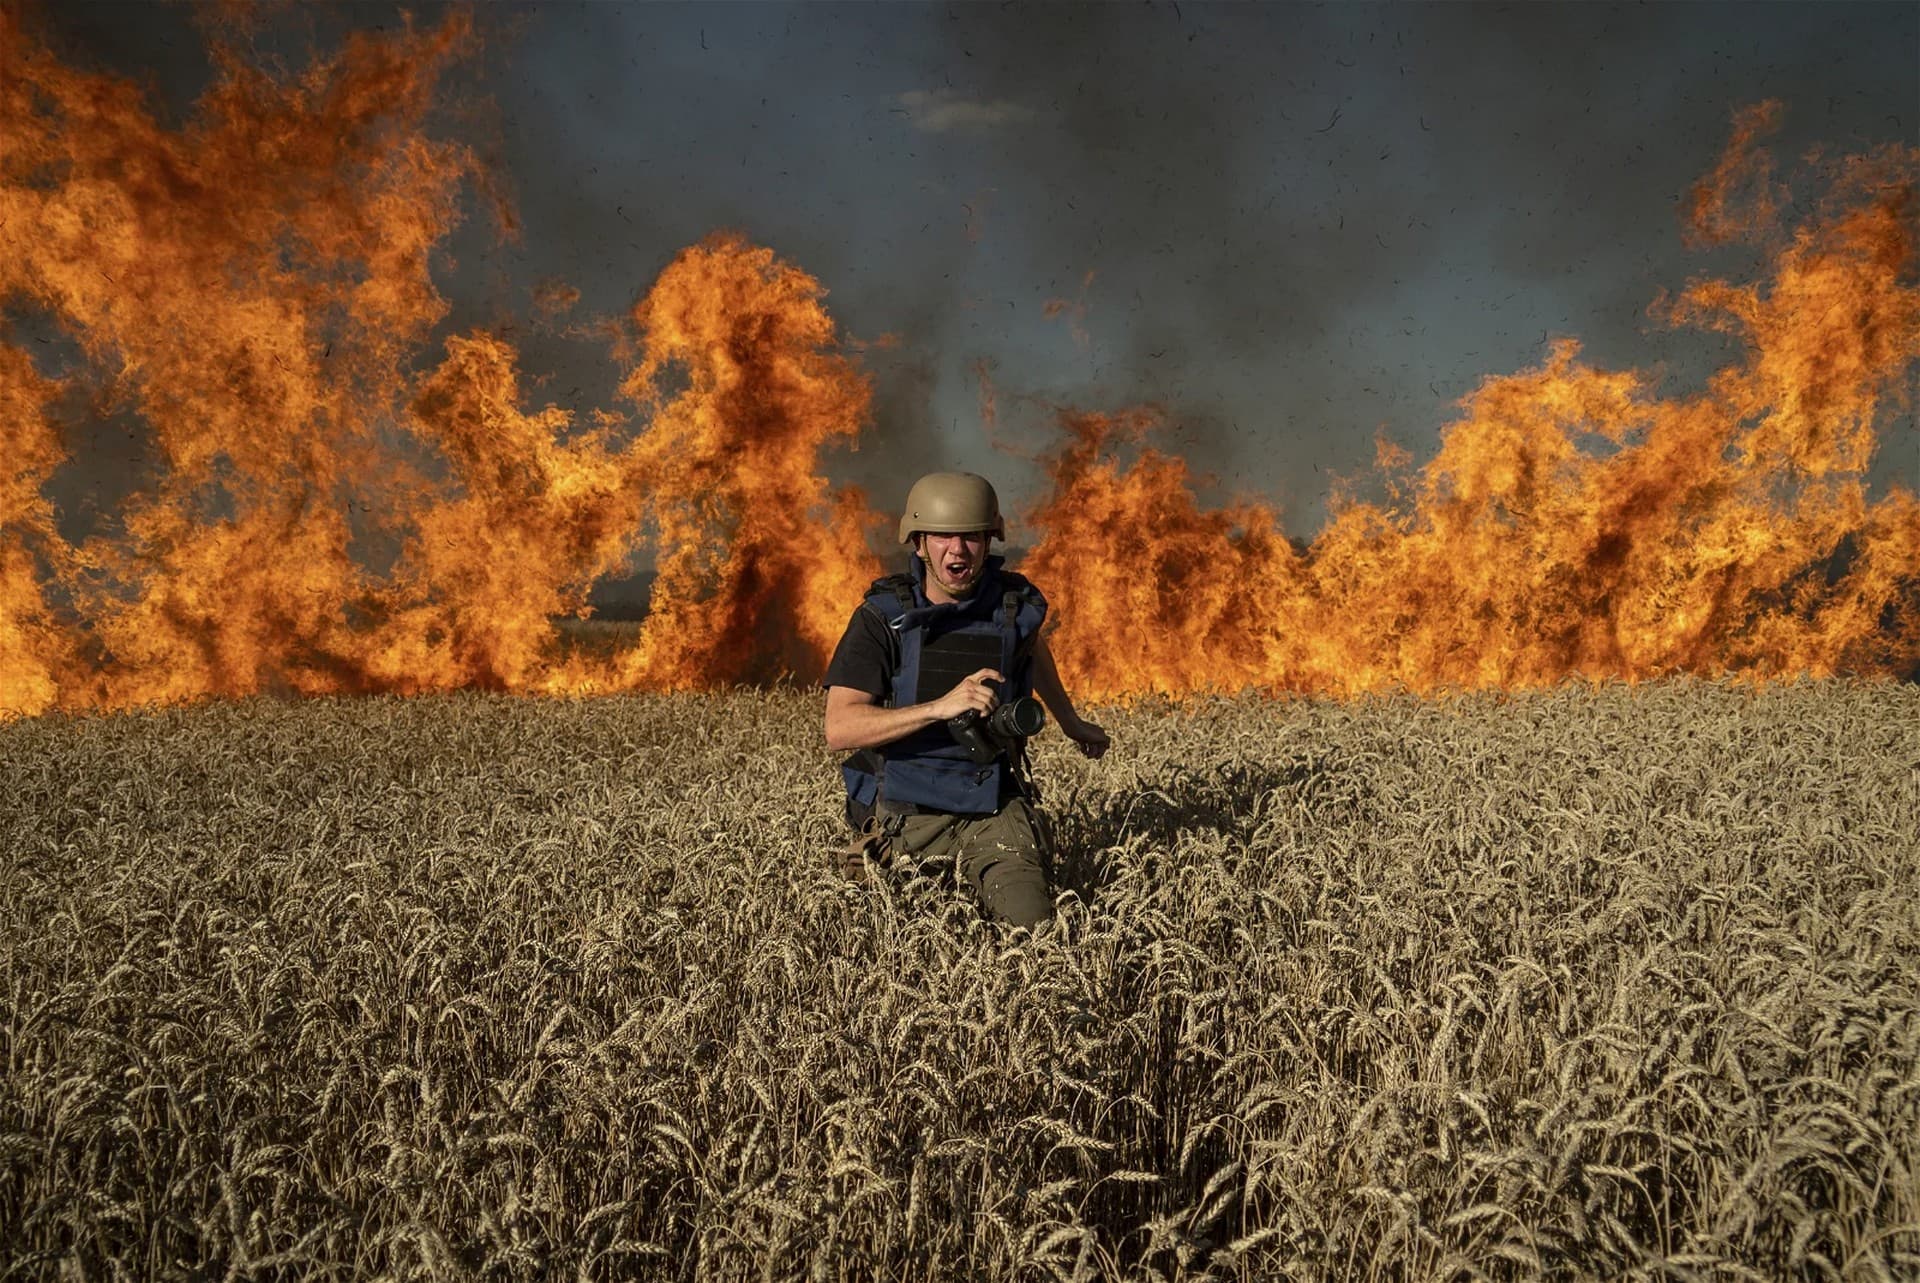 Photojournalist Evgeniy Maloletka runs from the fire in a burning wheat field during